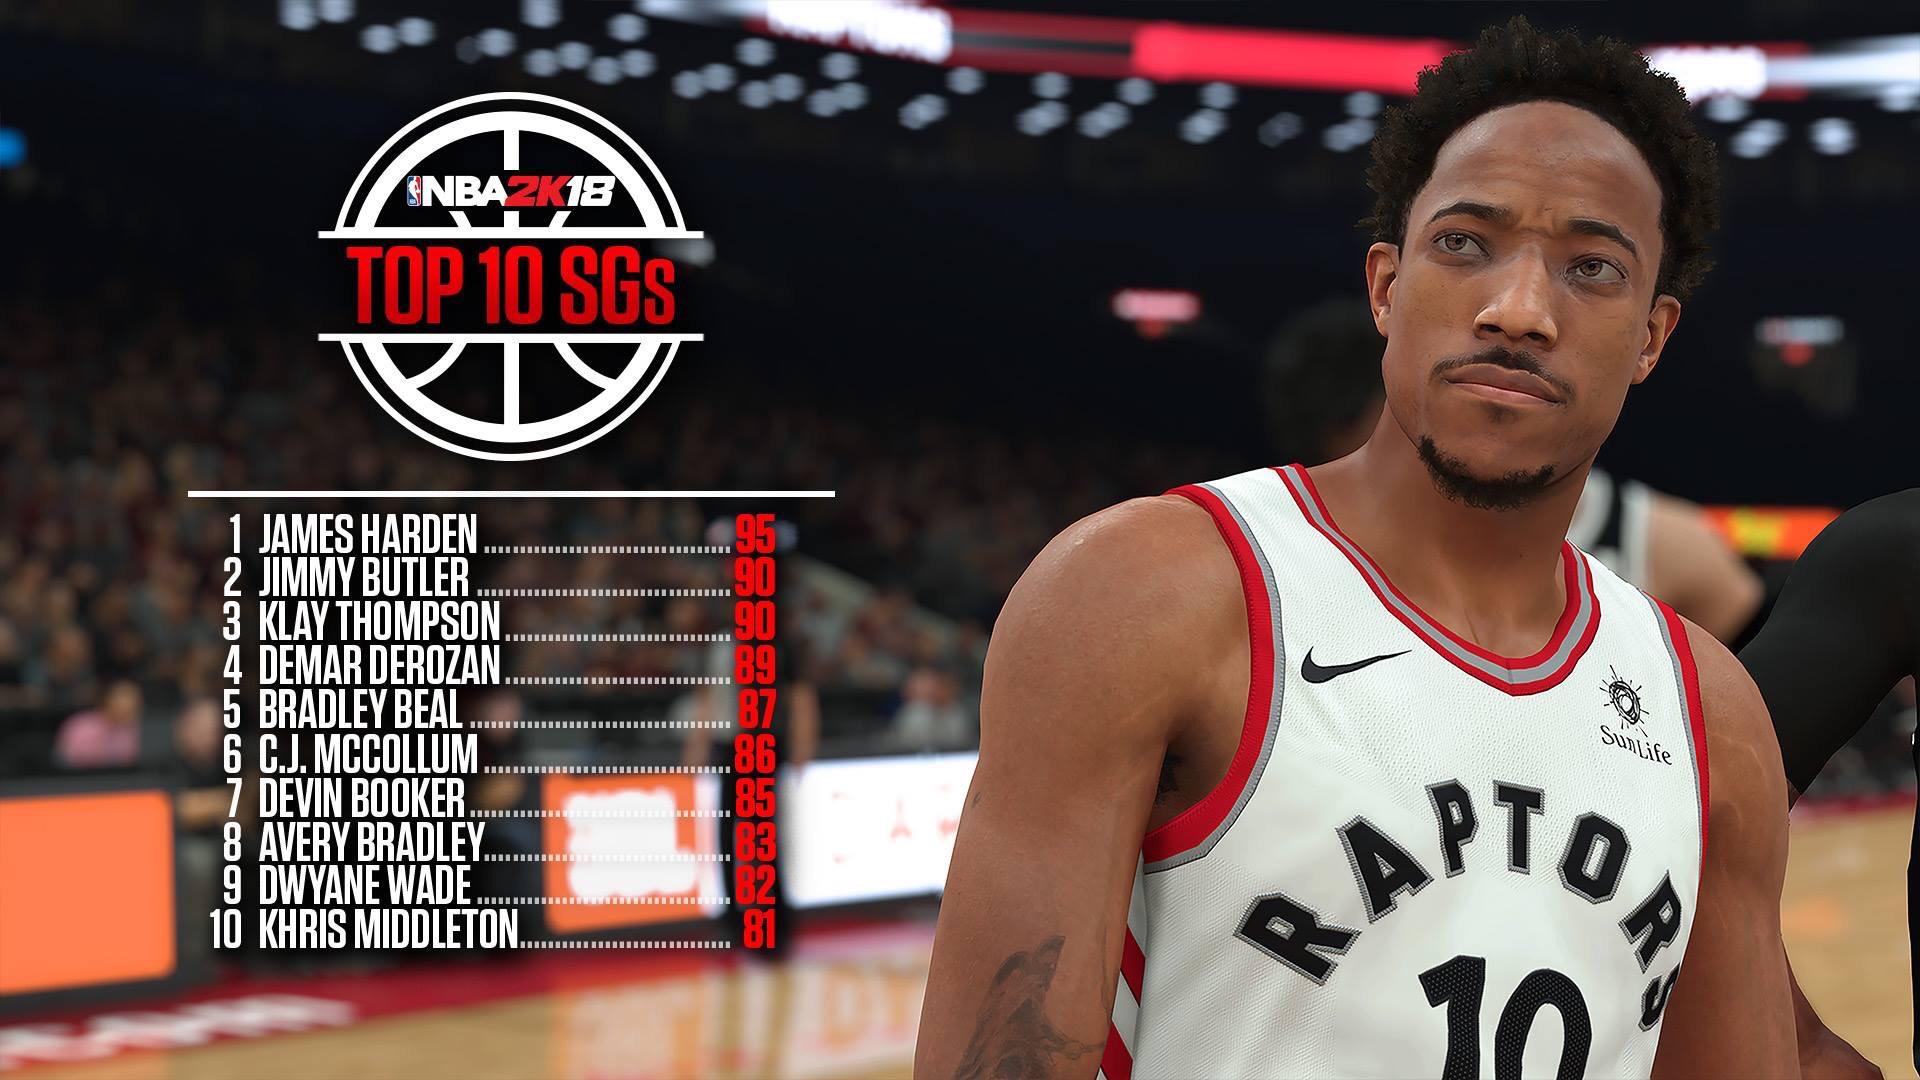 Middleton Is The 10th Best Shooting Guard In 2k18 With An Ovr